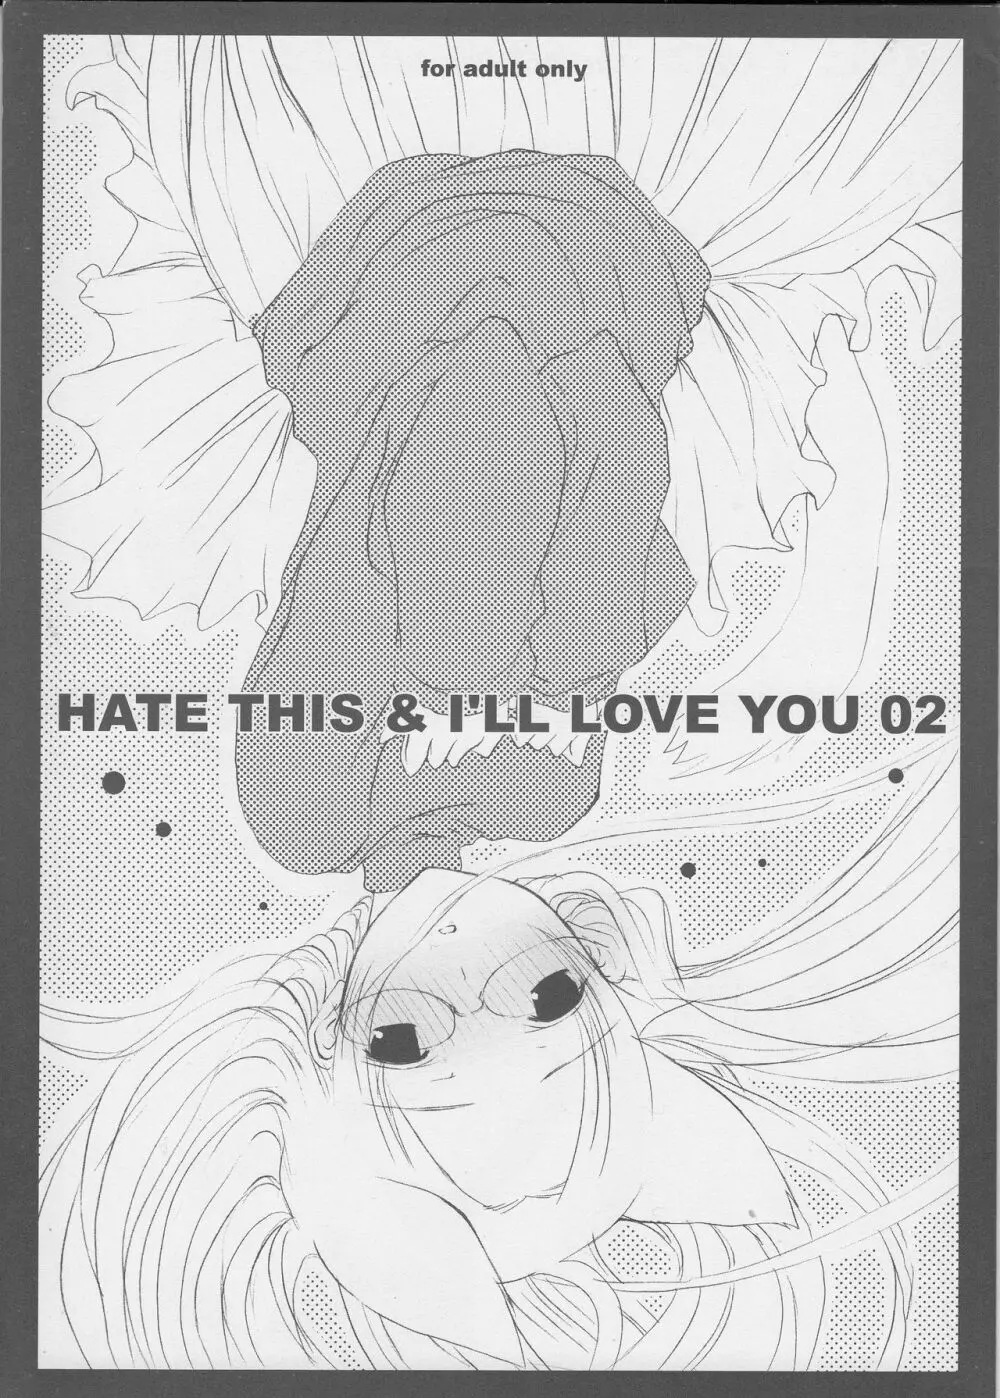 HATE THIS ＆ I’LL LOVE YOU 02